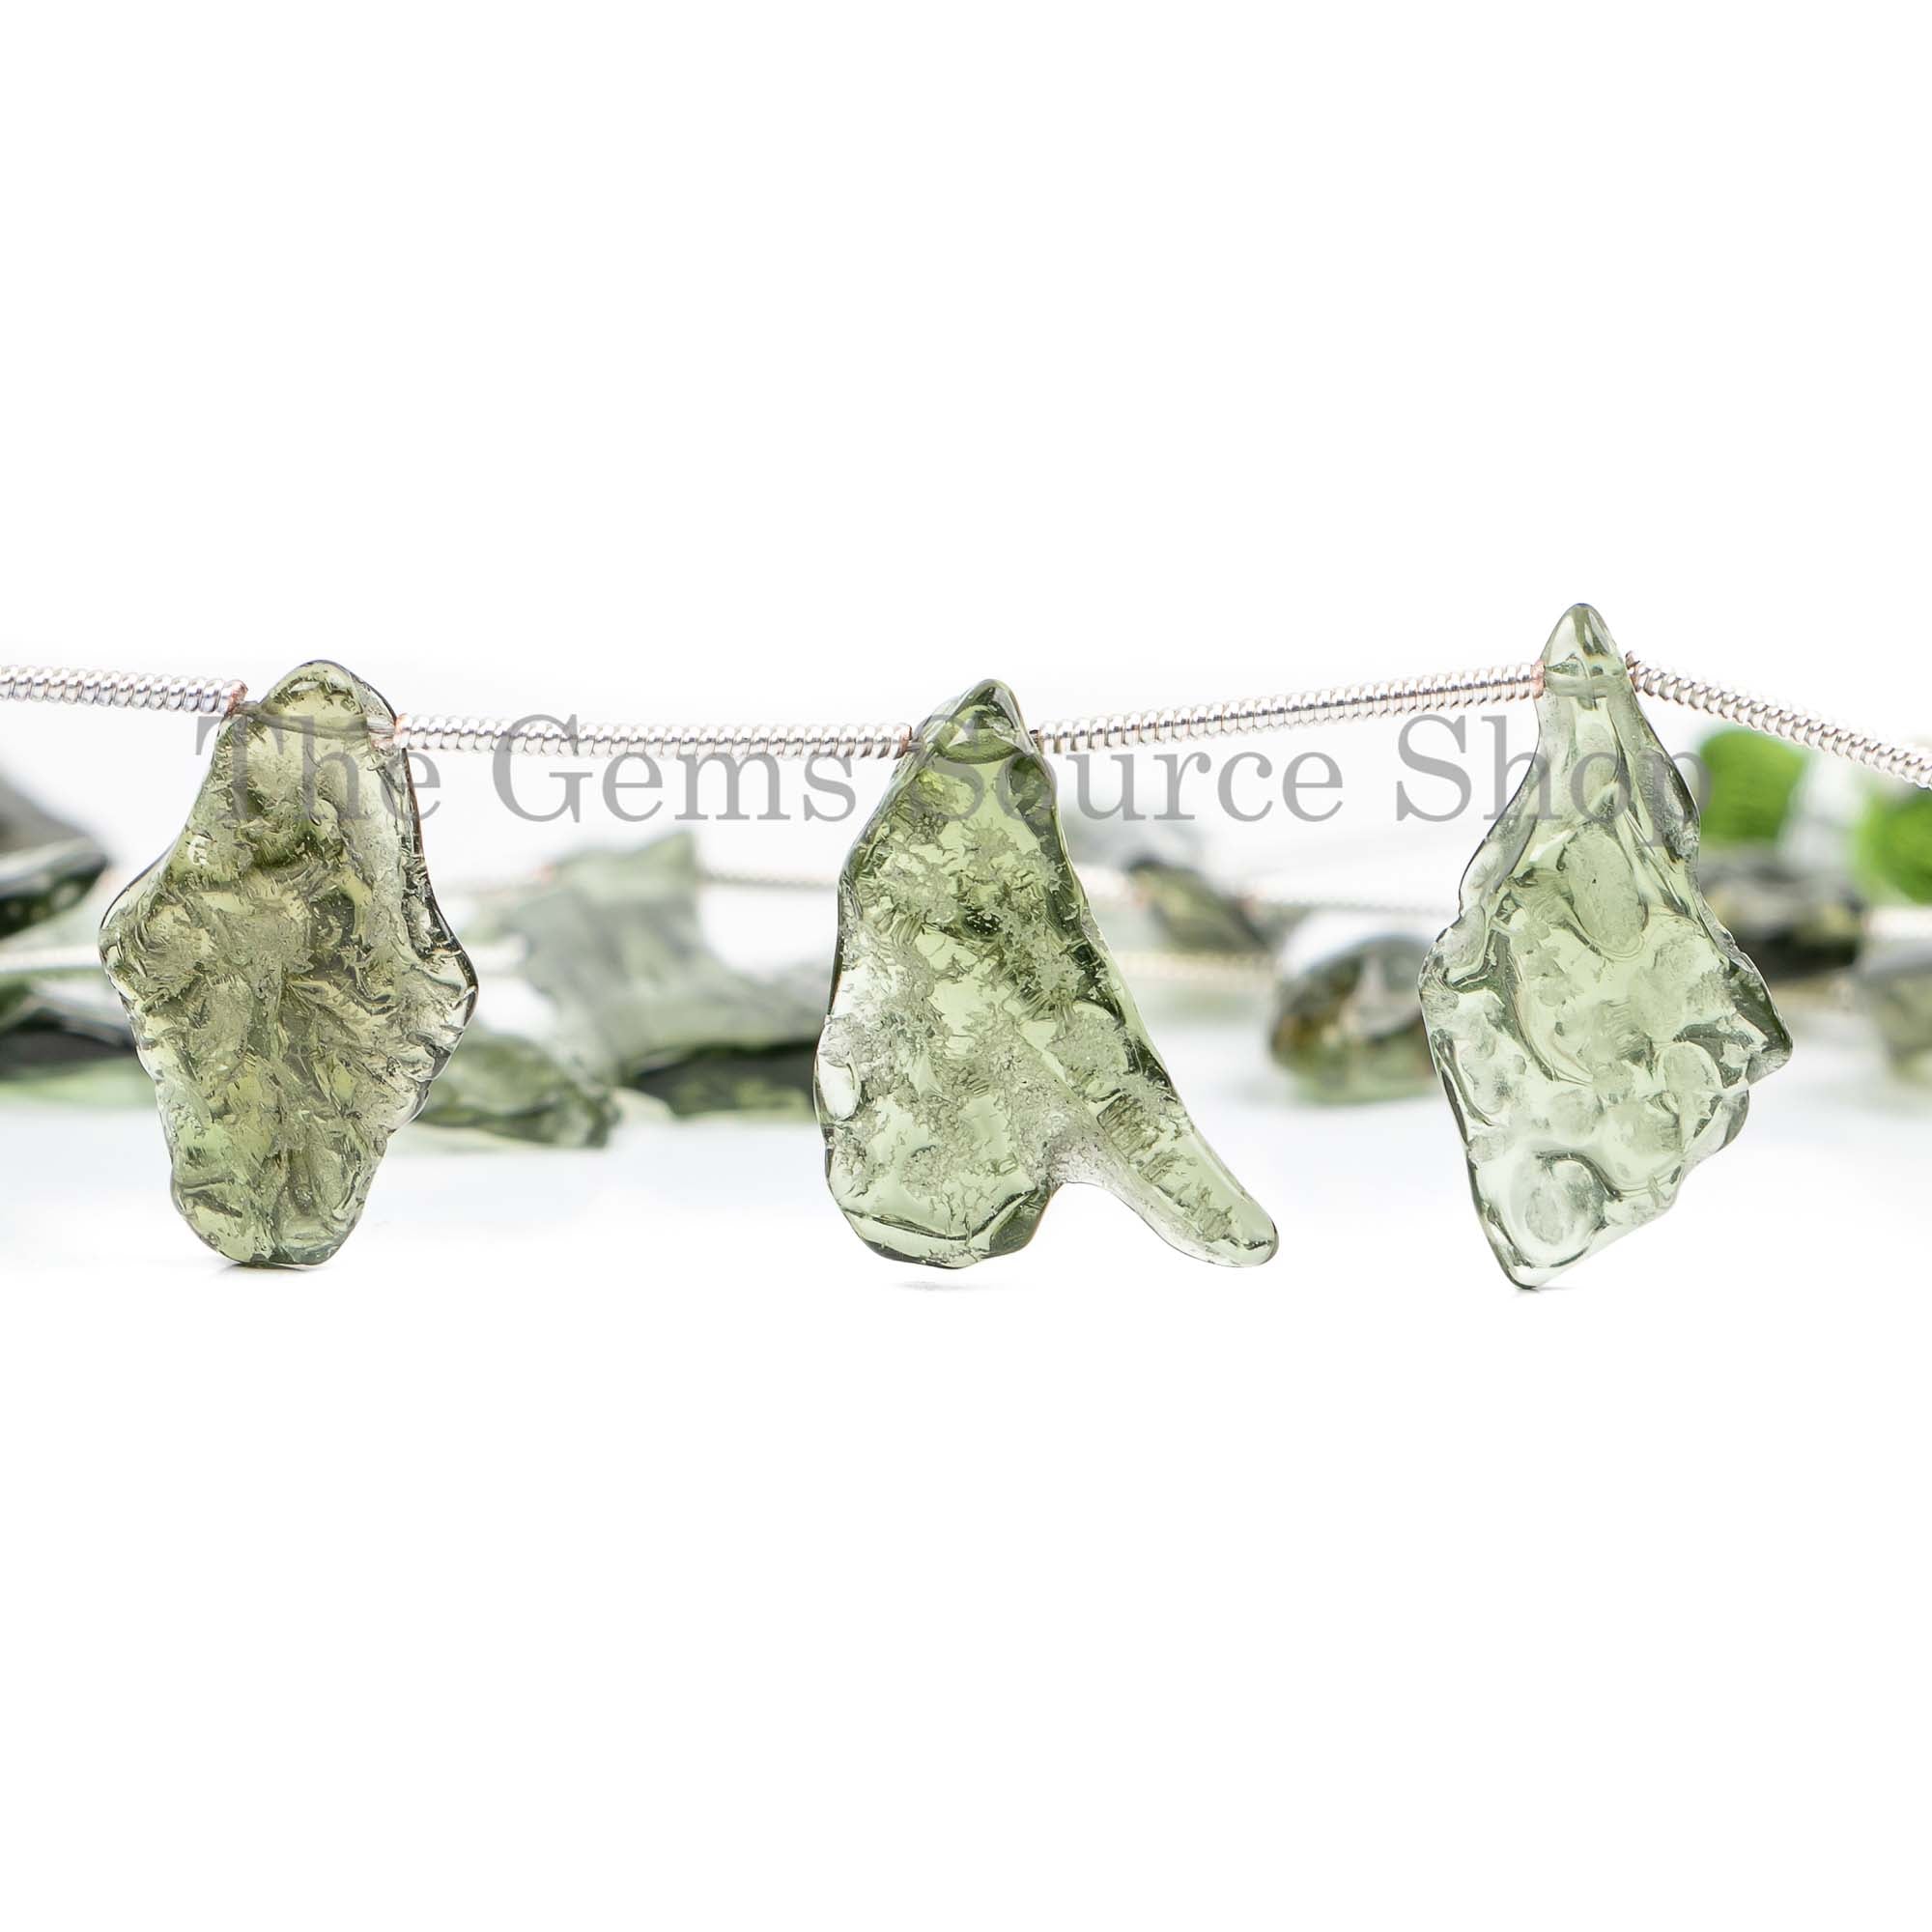 Top Quality Moldavite Fancy Nuggets Beads, Moldavite Nuggets Beads, Fancy Beads, Gemstone Beads